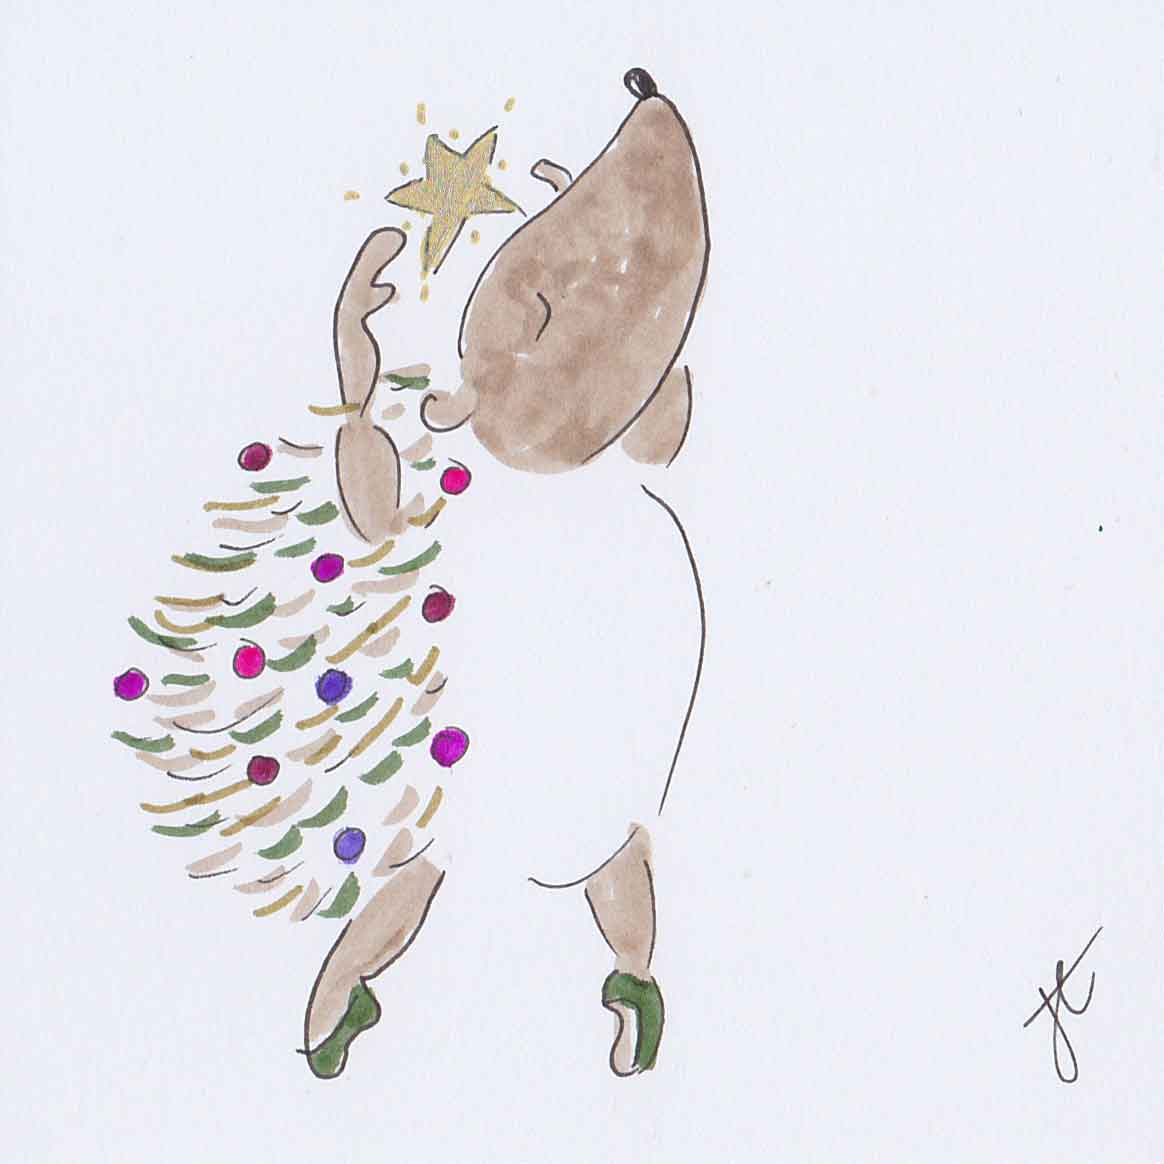 Hedgie en pointe with Christmas tree decorations in her spikes and a star between her raised arms